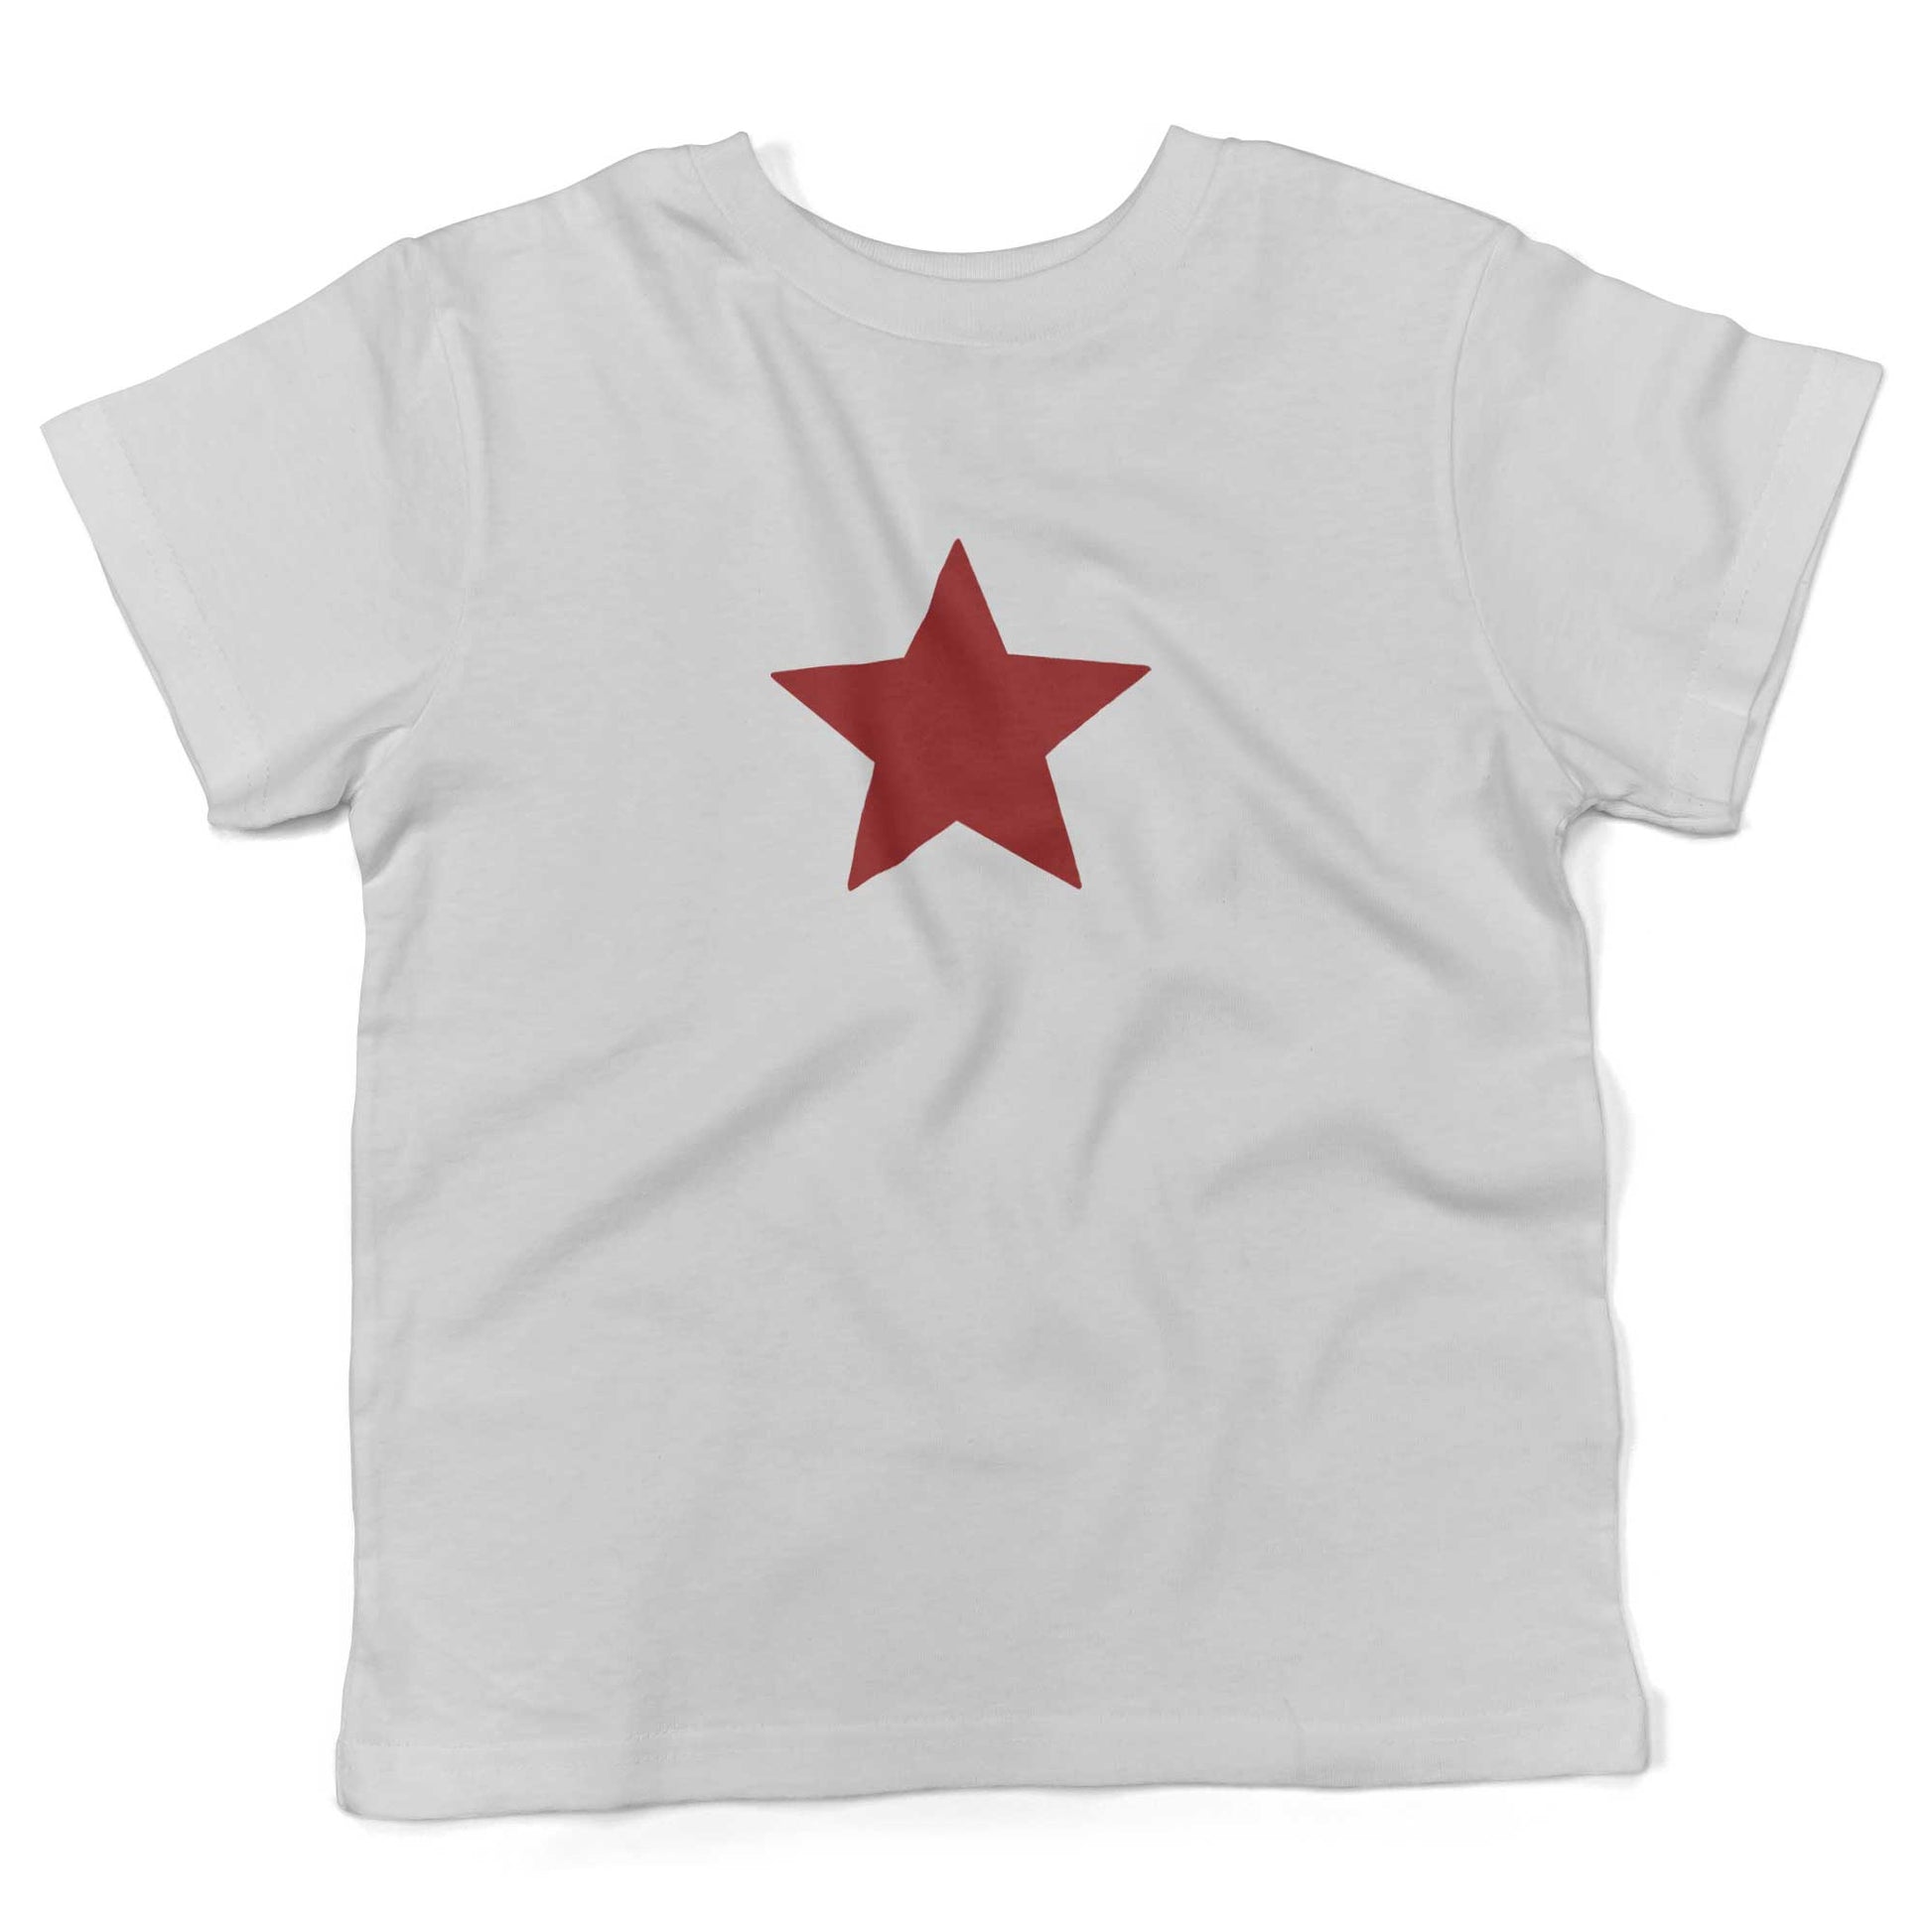 Five-Point Star Toddler Shirt-White-Red Star